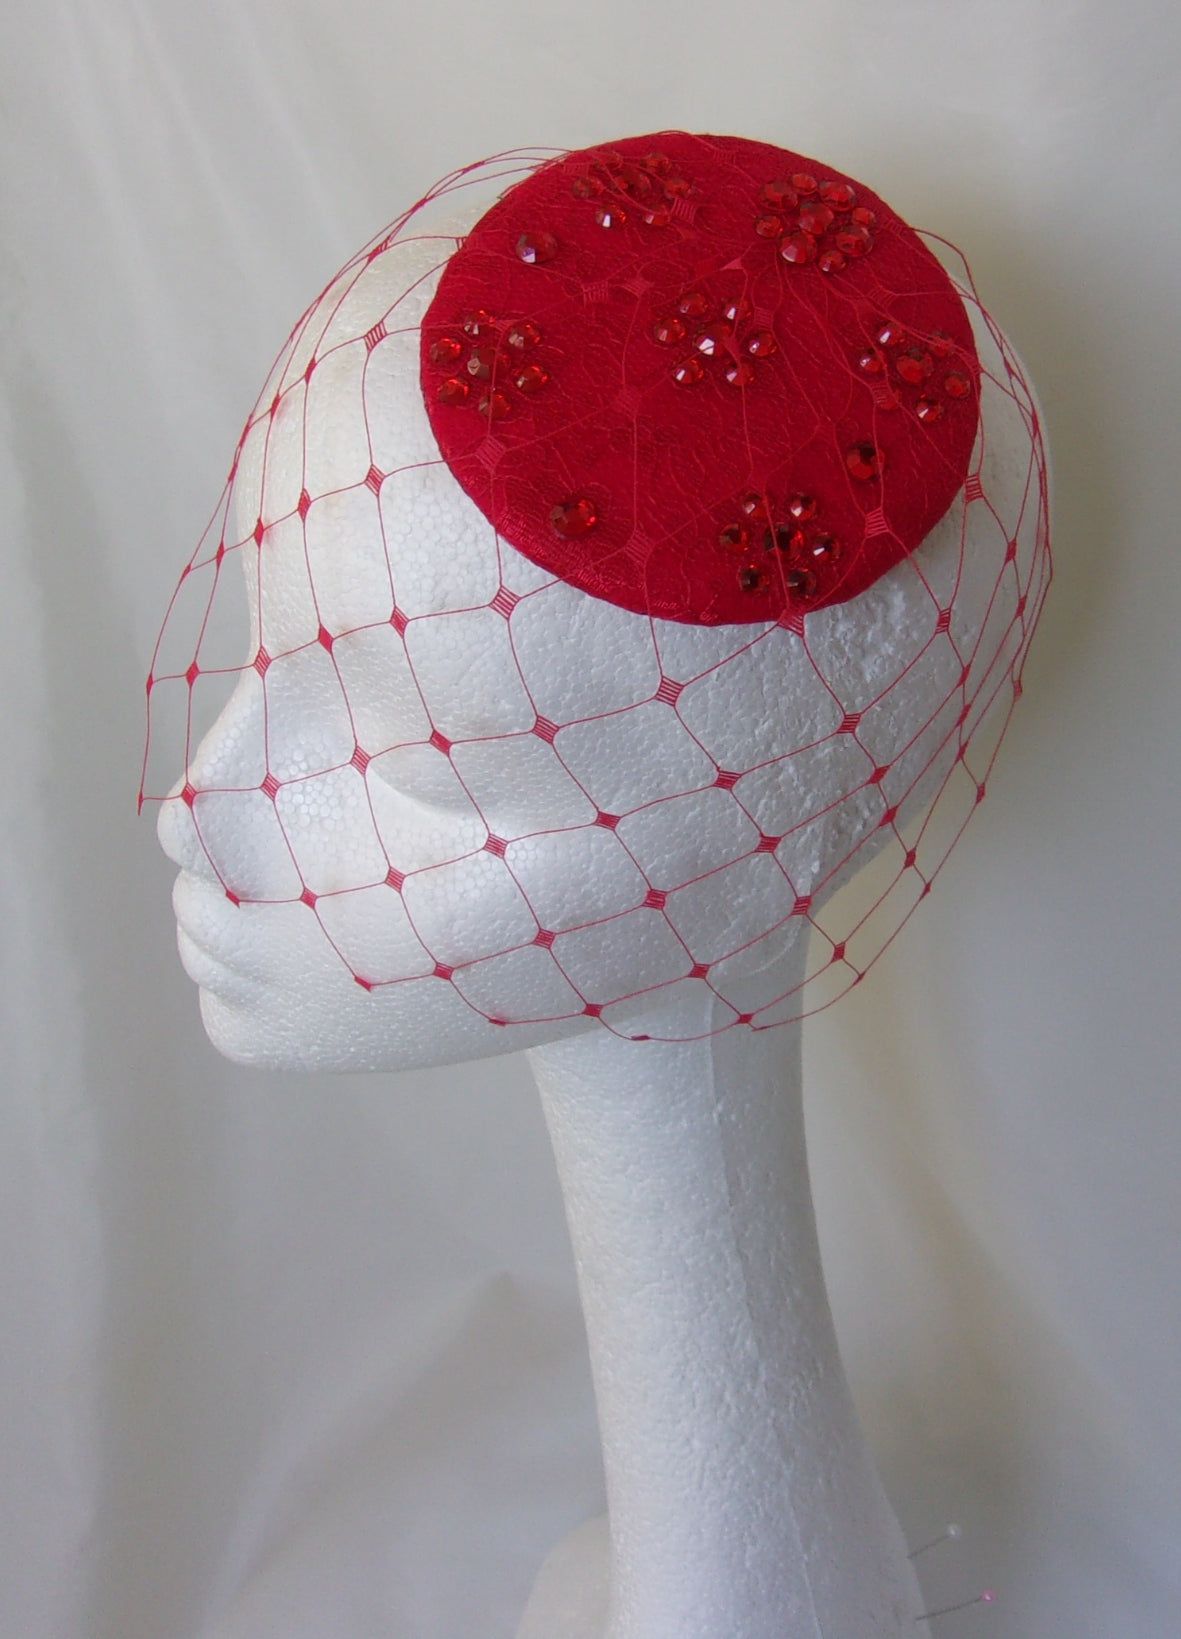 Red Crystal Fascinator Vintage Veiled Headpiece - A Retro Style Lace Percher Disc with Crystals Merry Widow Blusher Veil - Ready Made